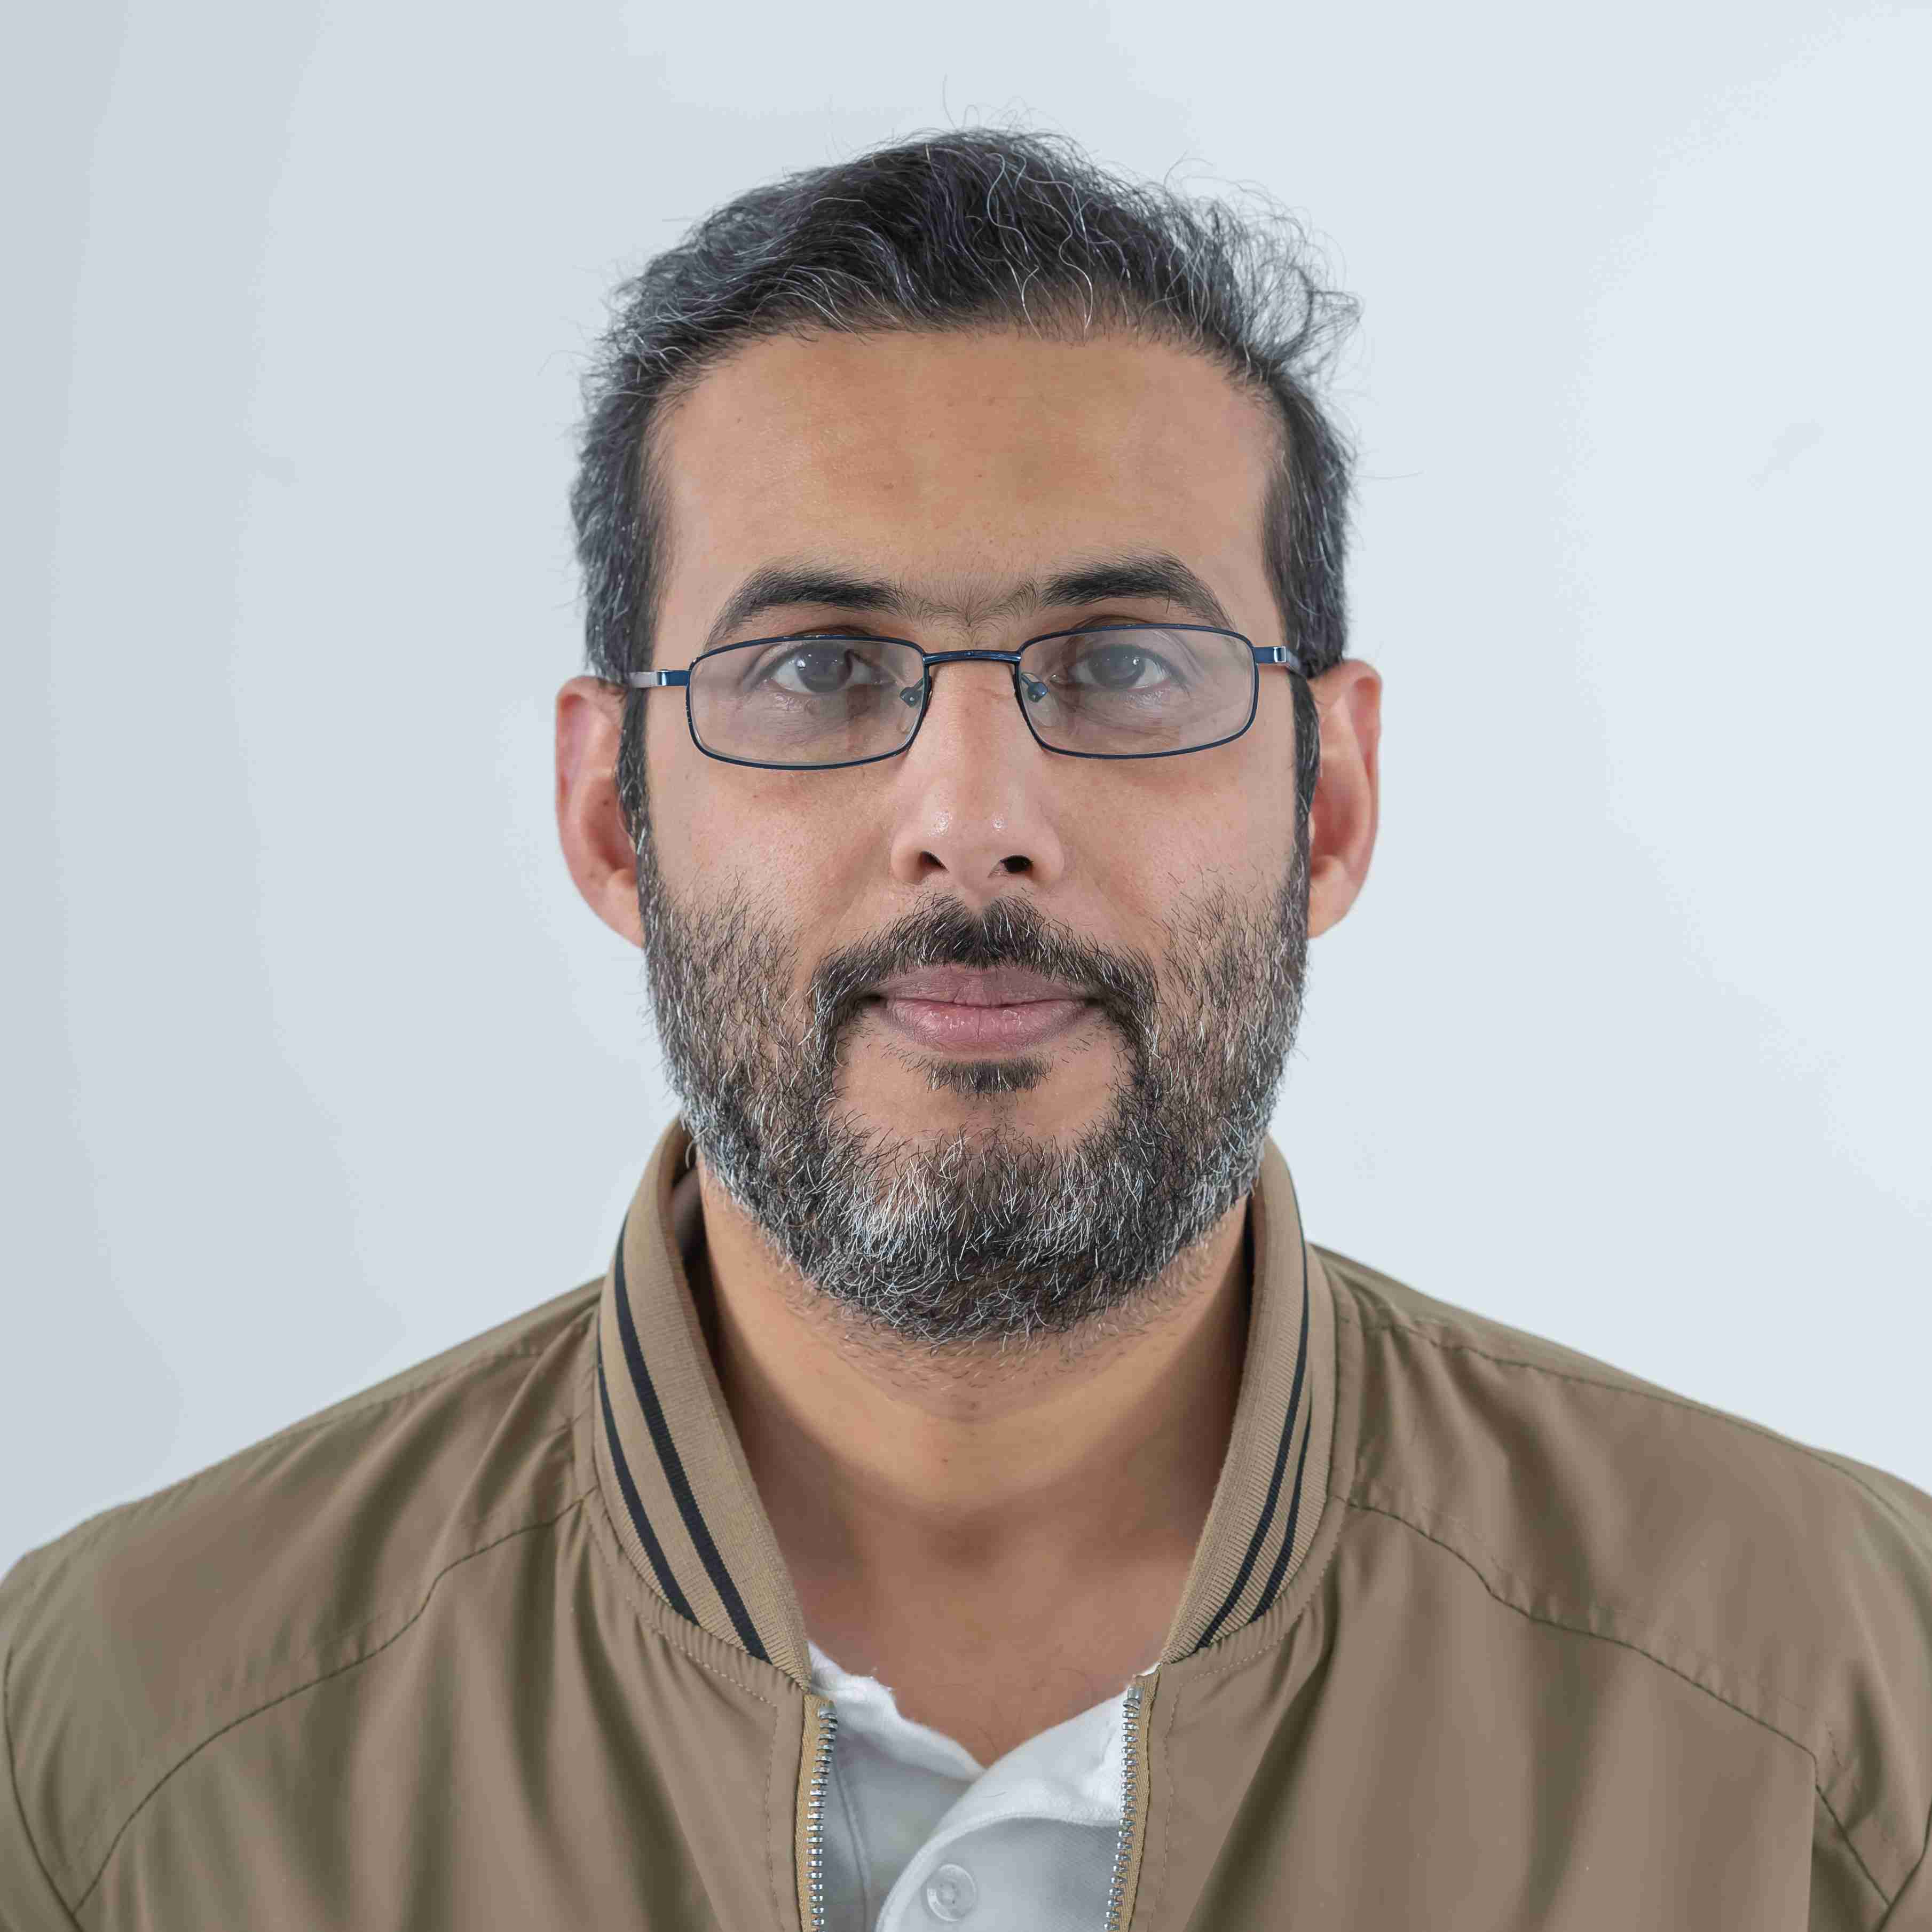 Profile image of Dr Ali Ahmed